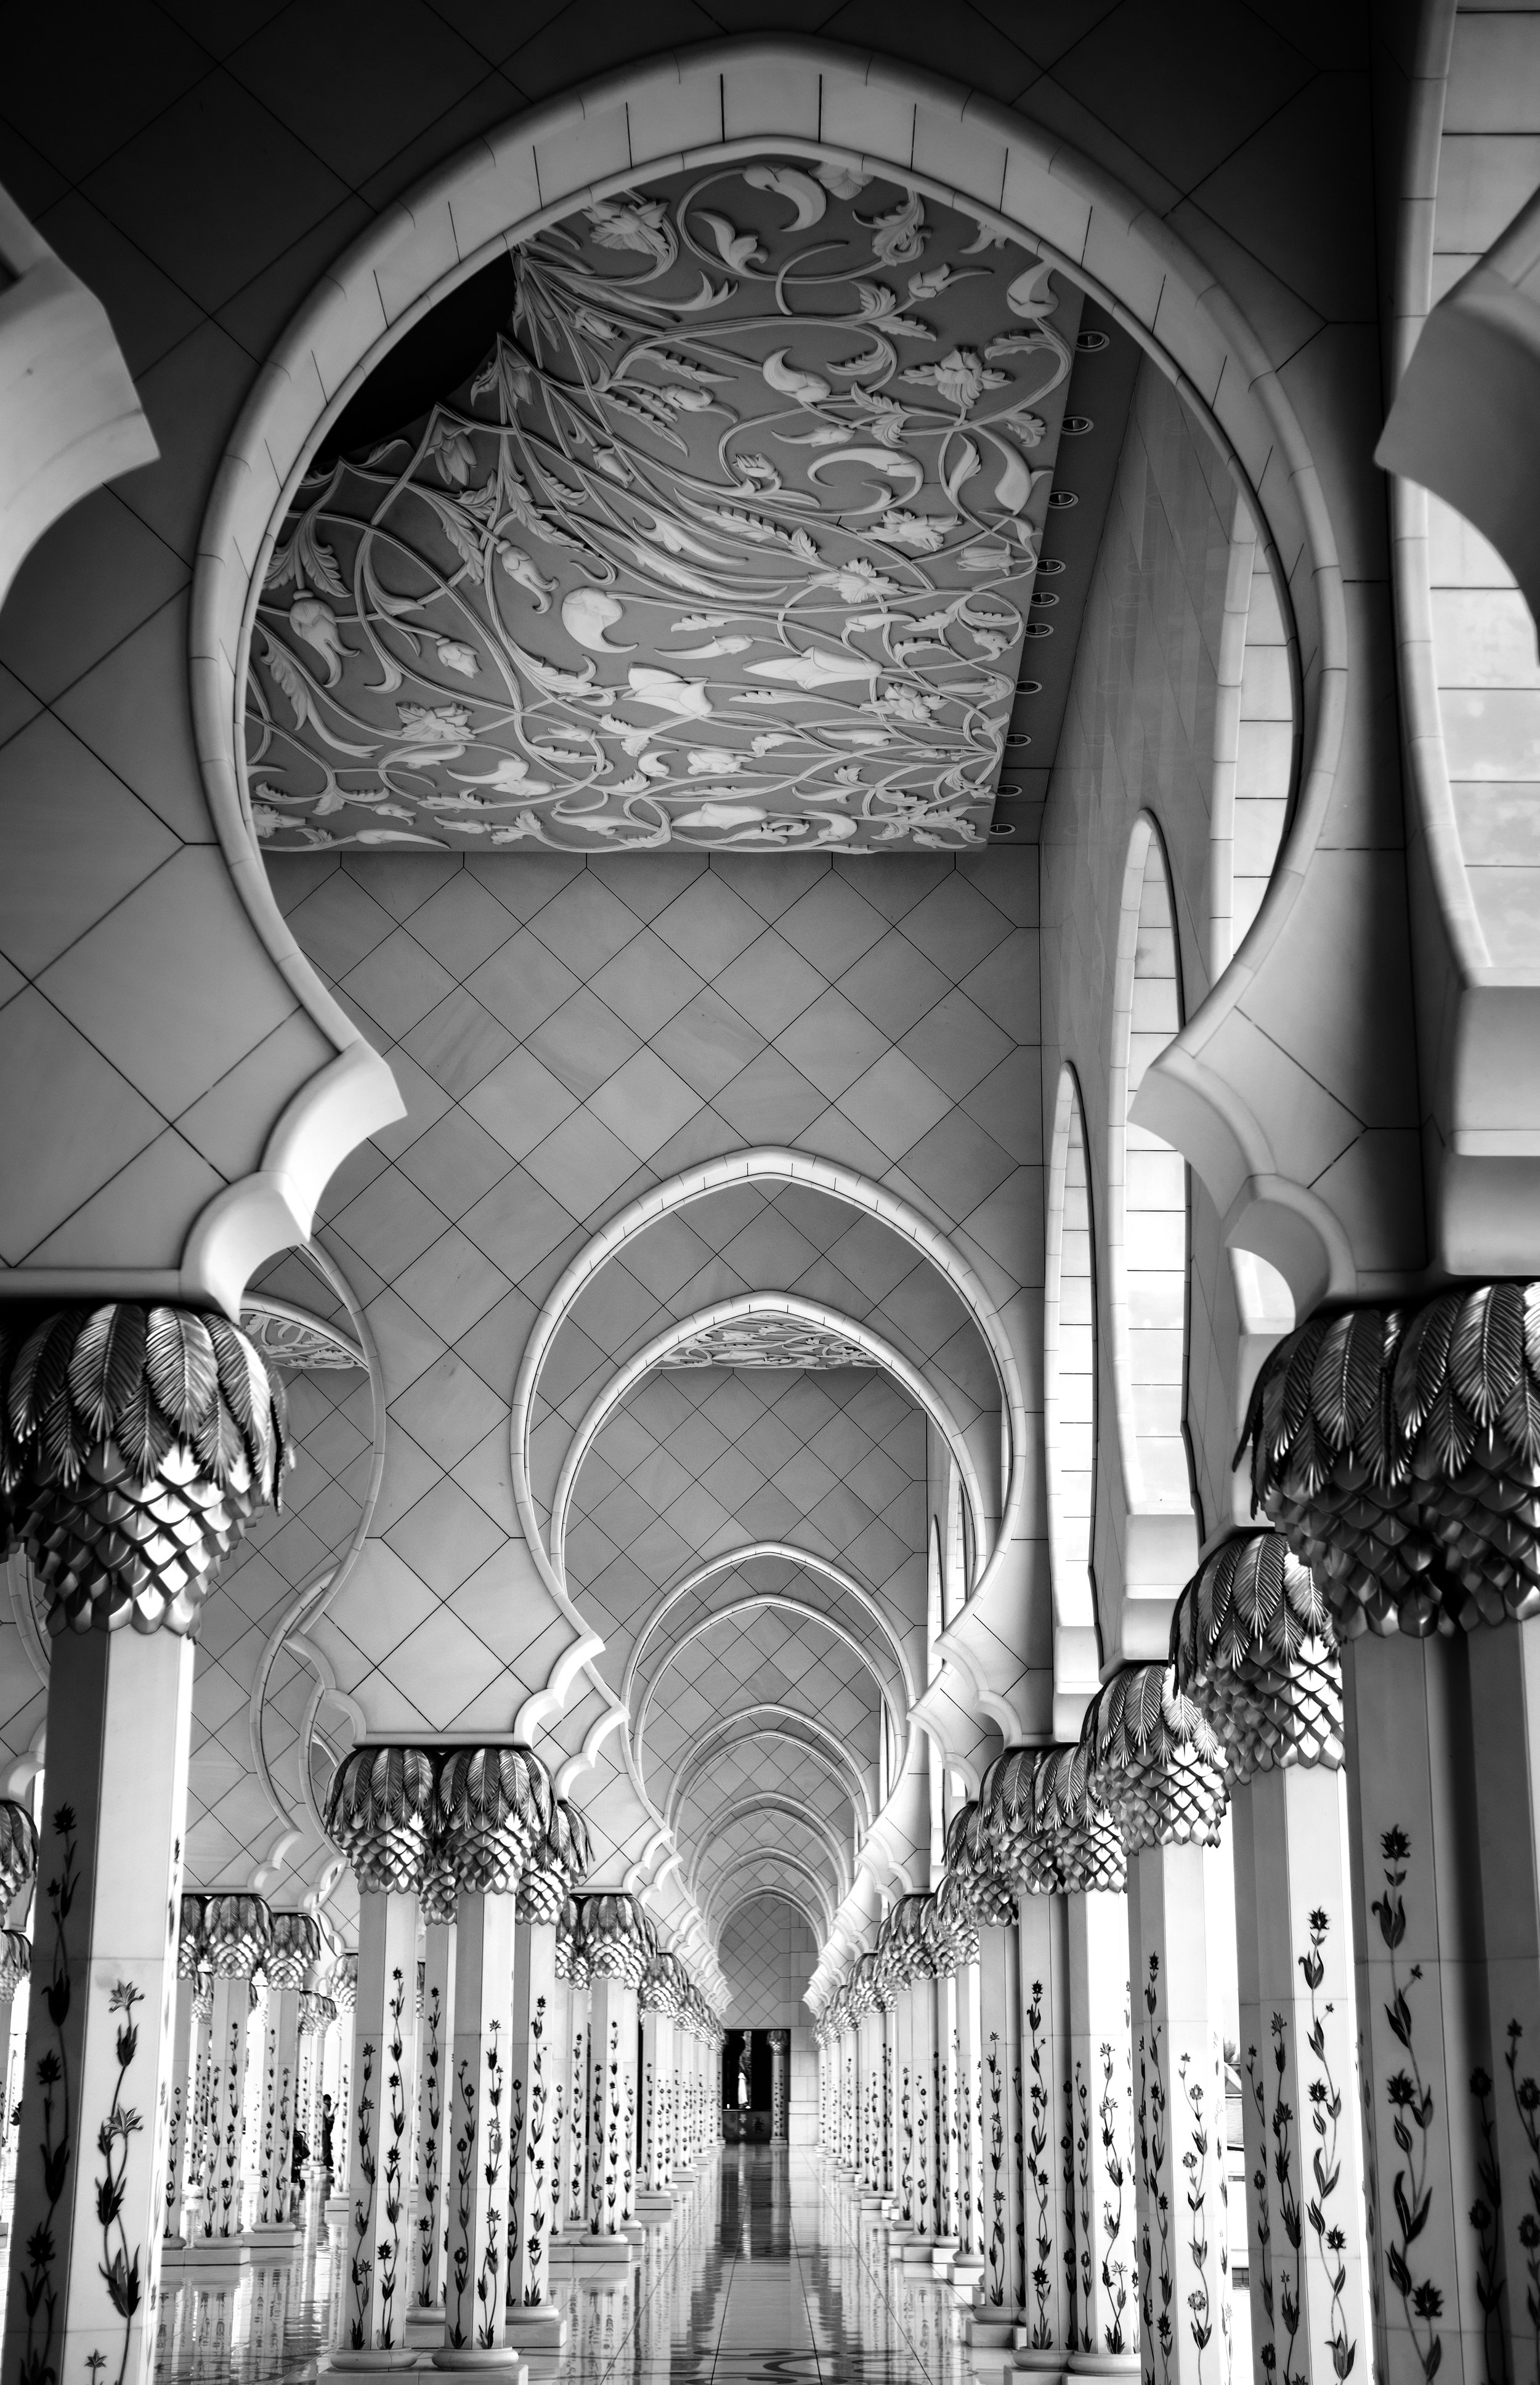 Arch shaped pillars and columns of the Sheikh Zayed Grand Mosque of Abu Dhabi